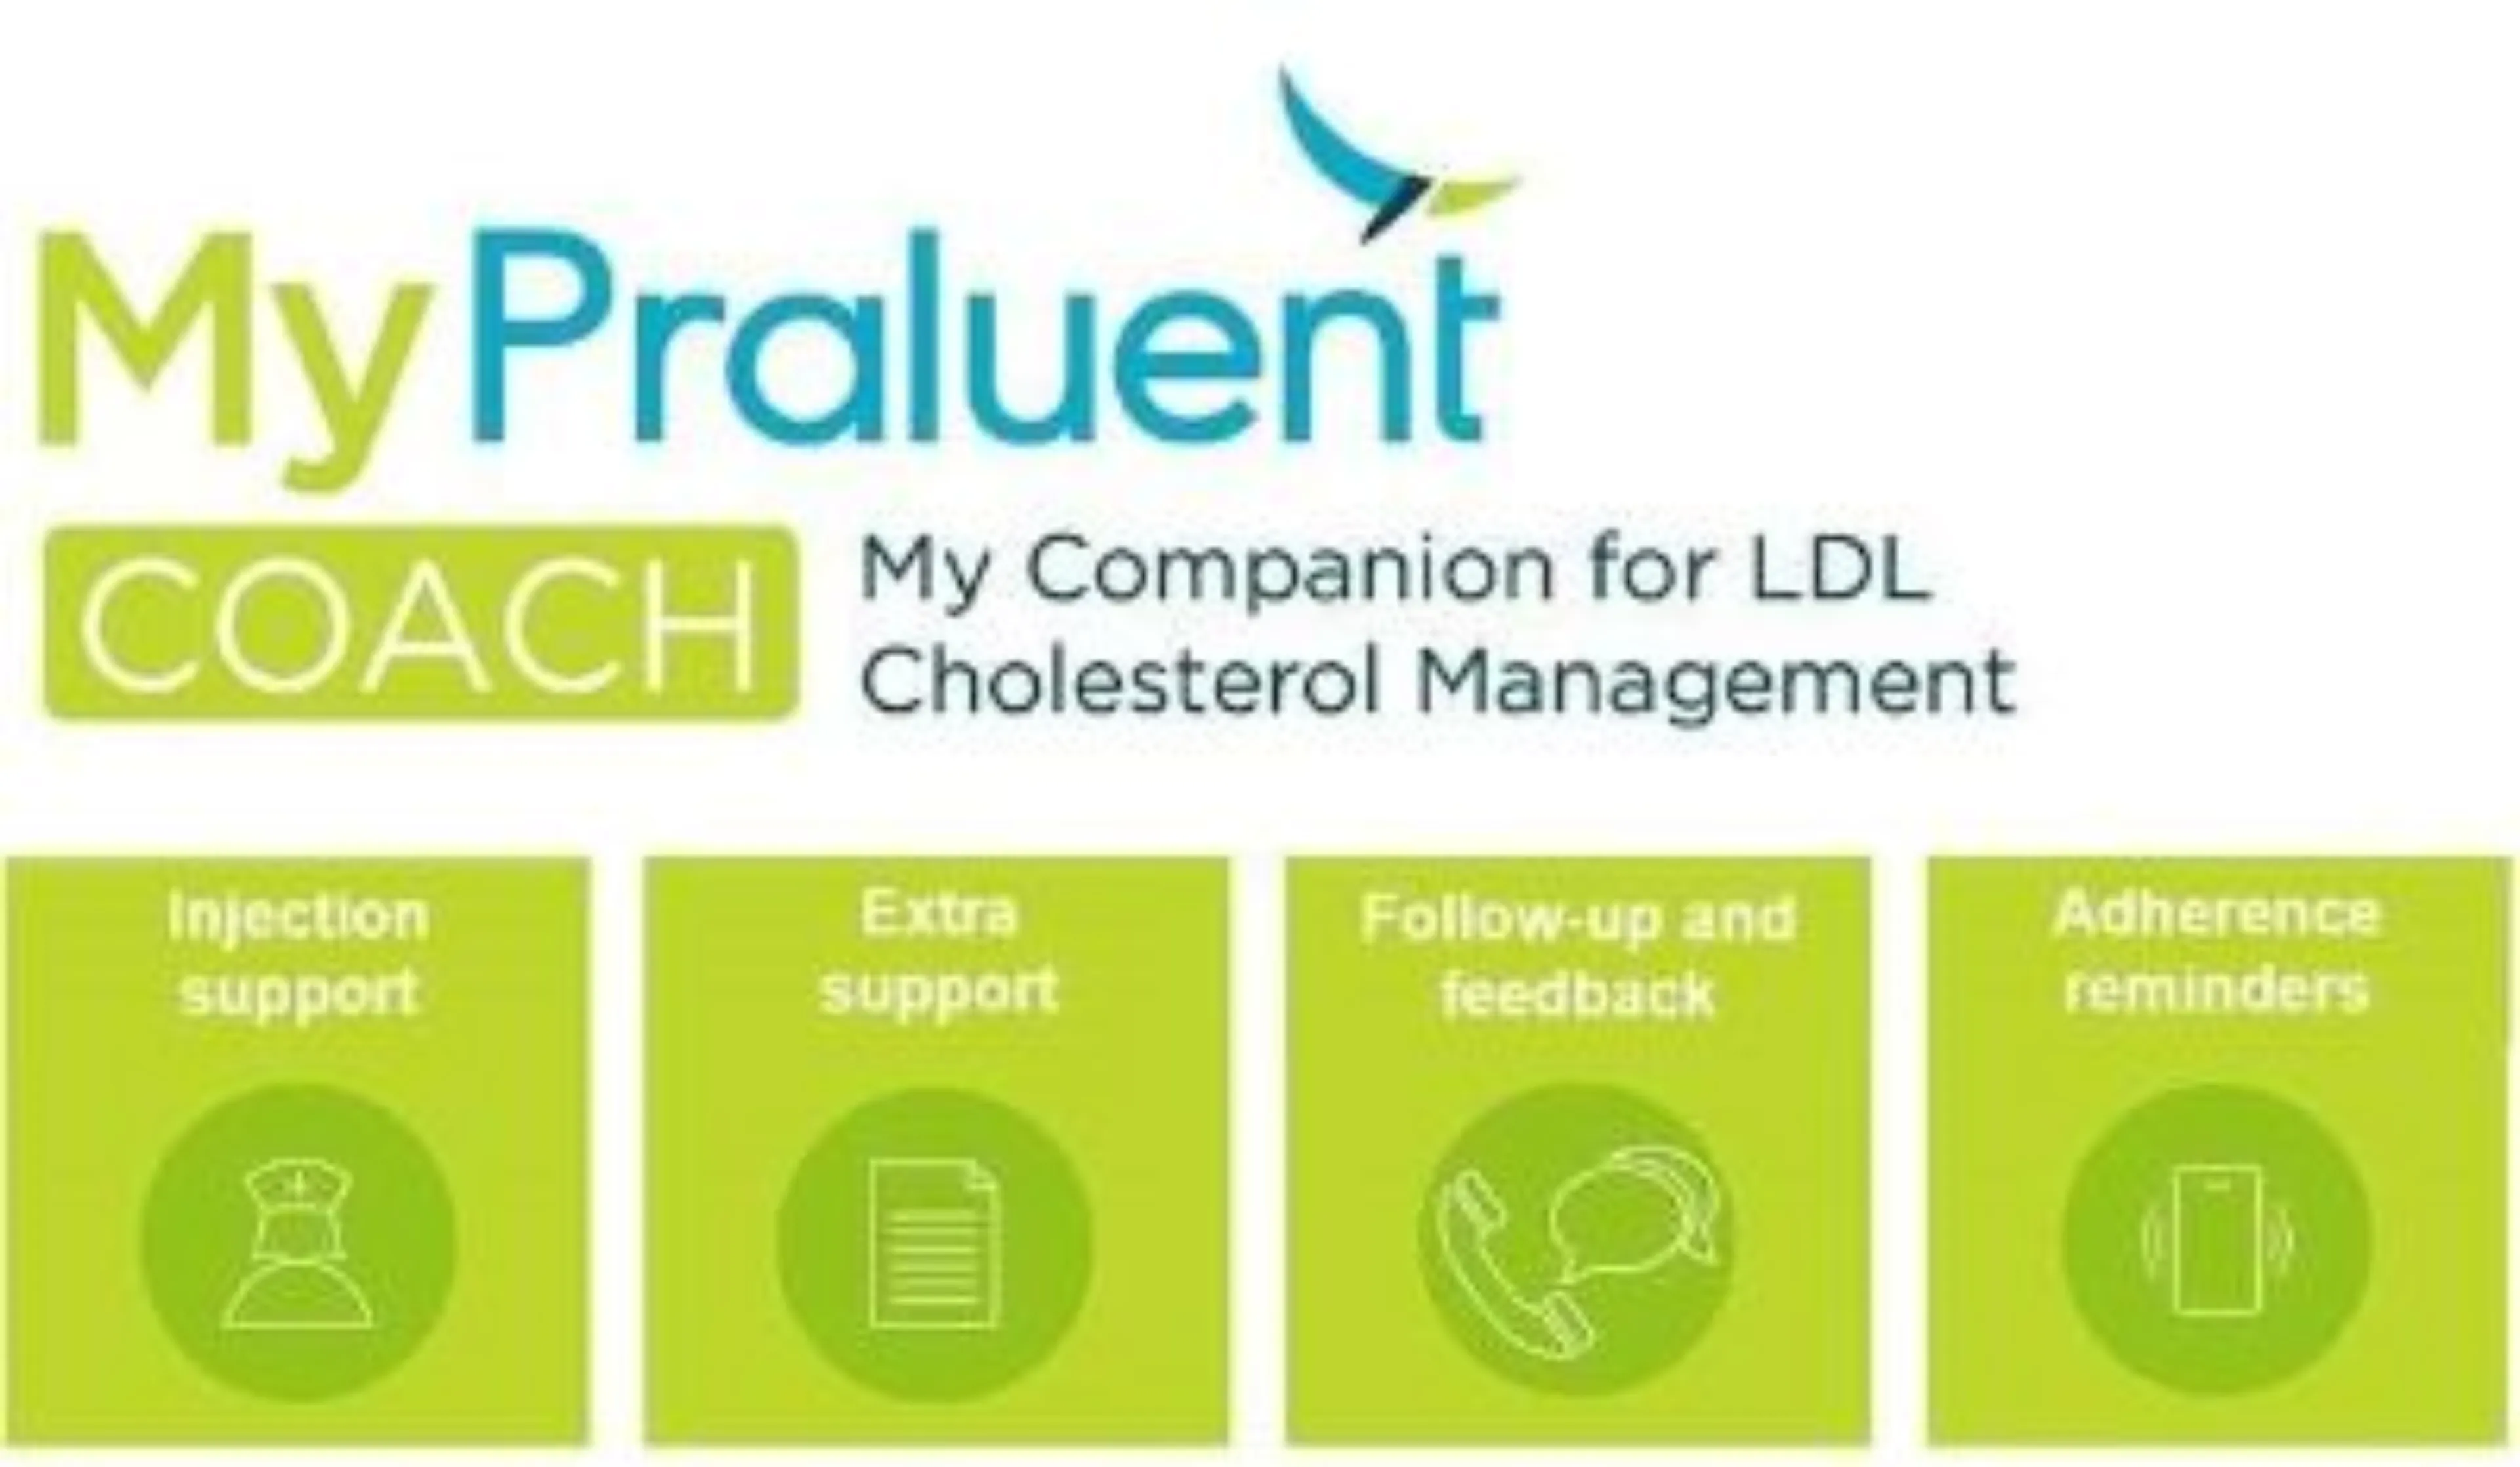 MyPraluent Coach. My Companion for LDL Cholesterol Management. Features: Injection support, Extra support, Follow-up and feed